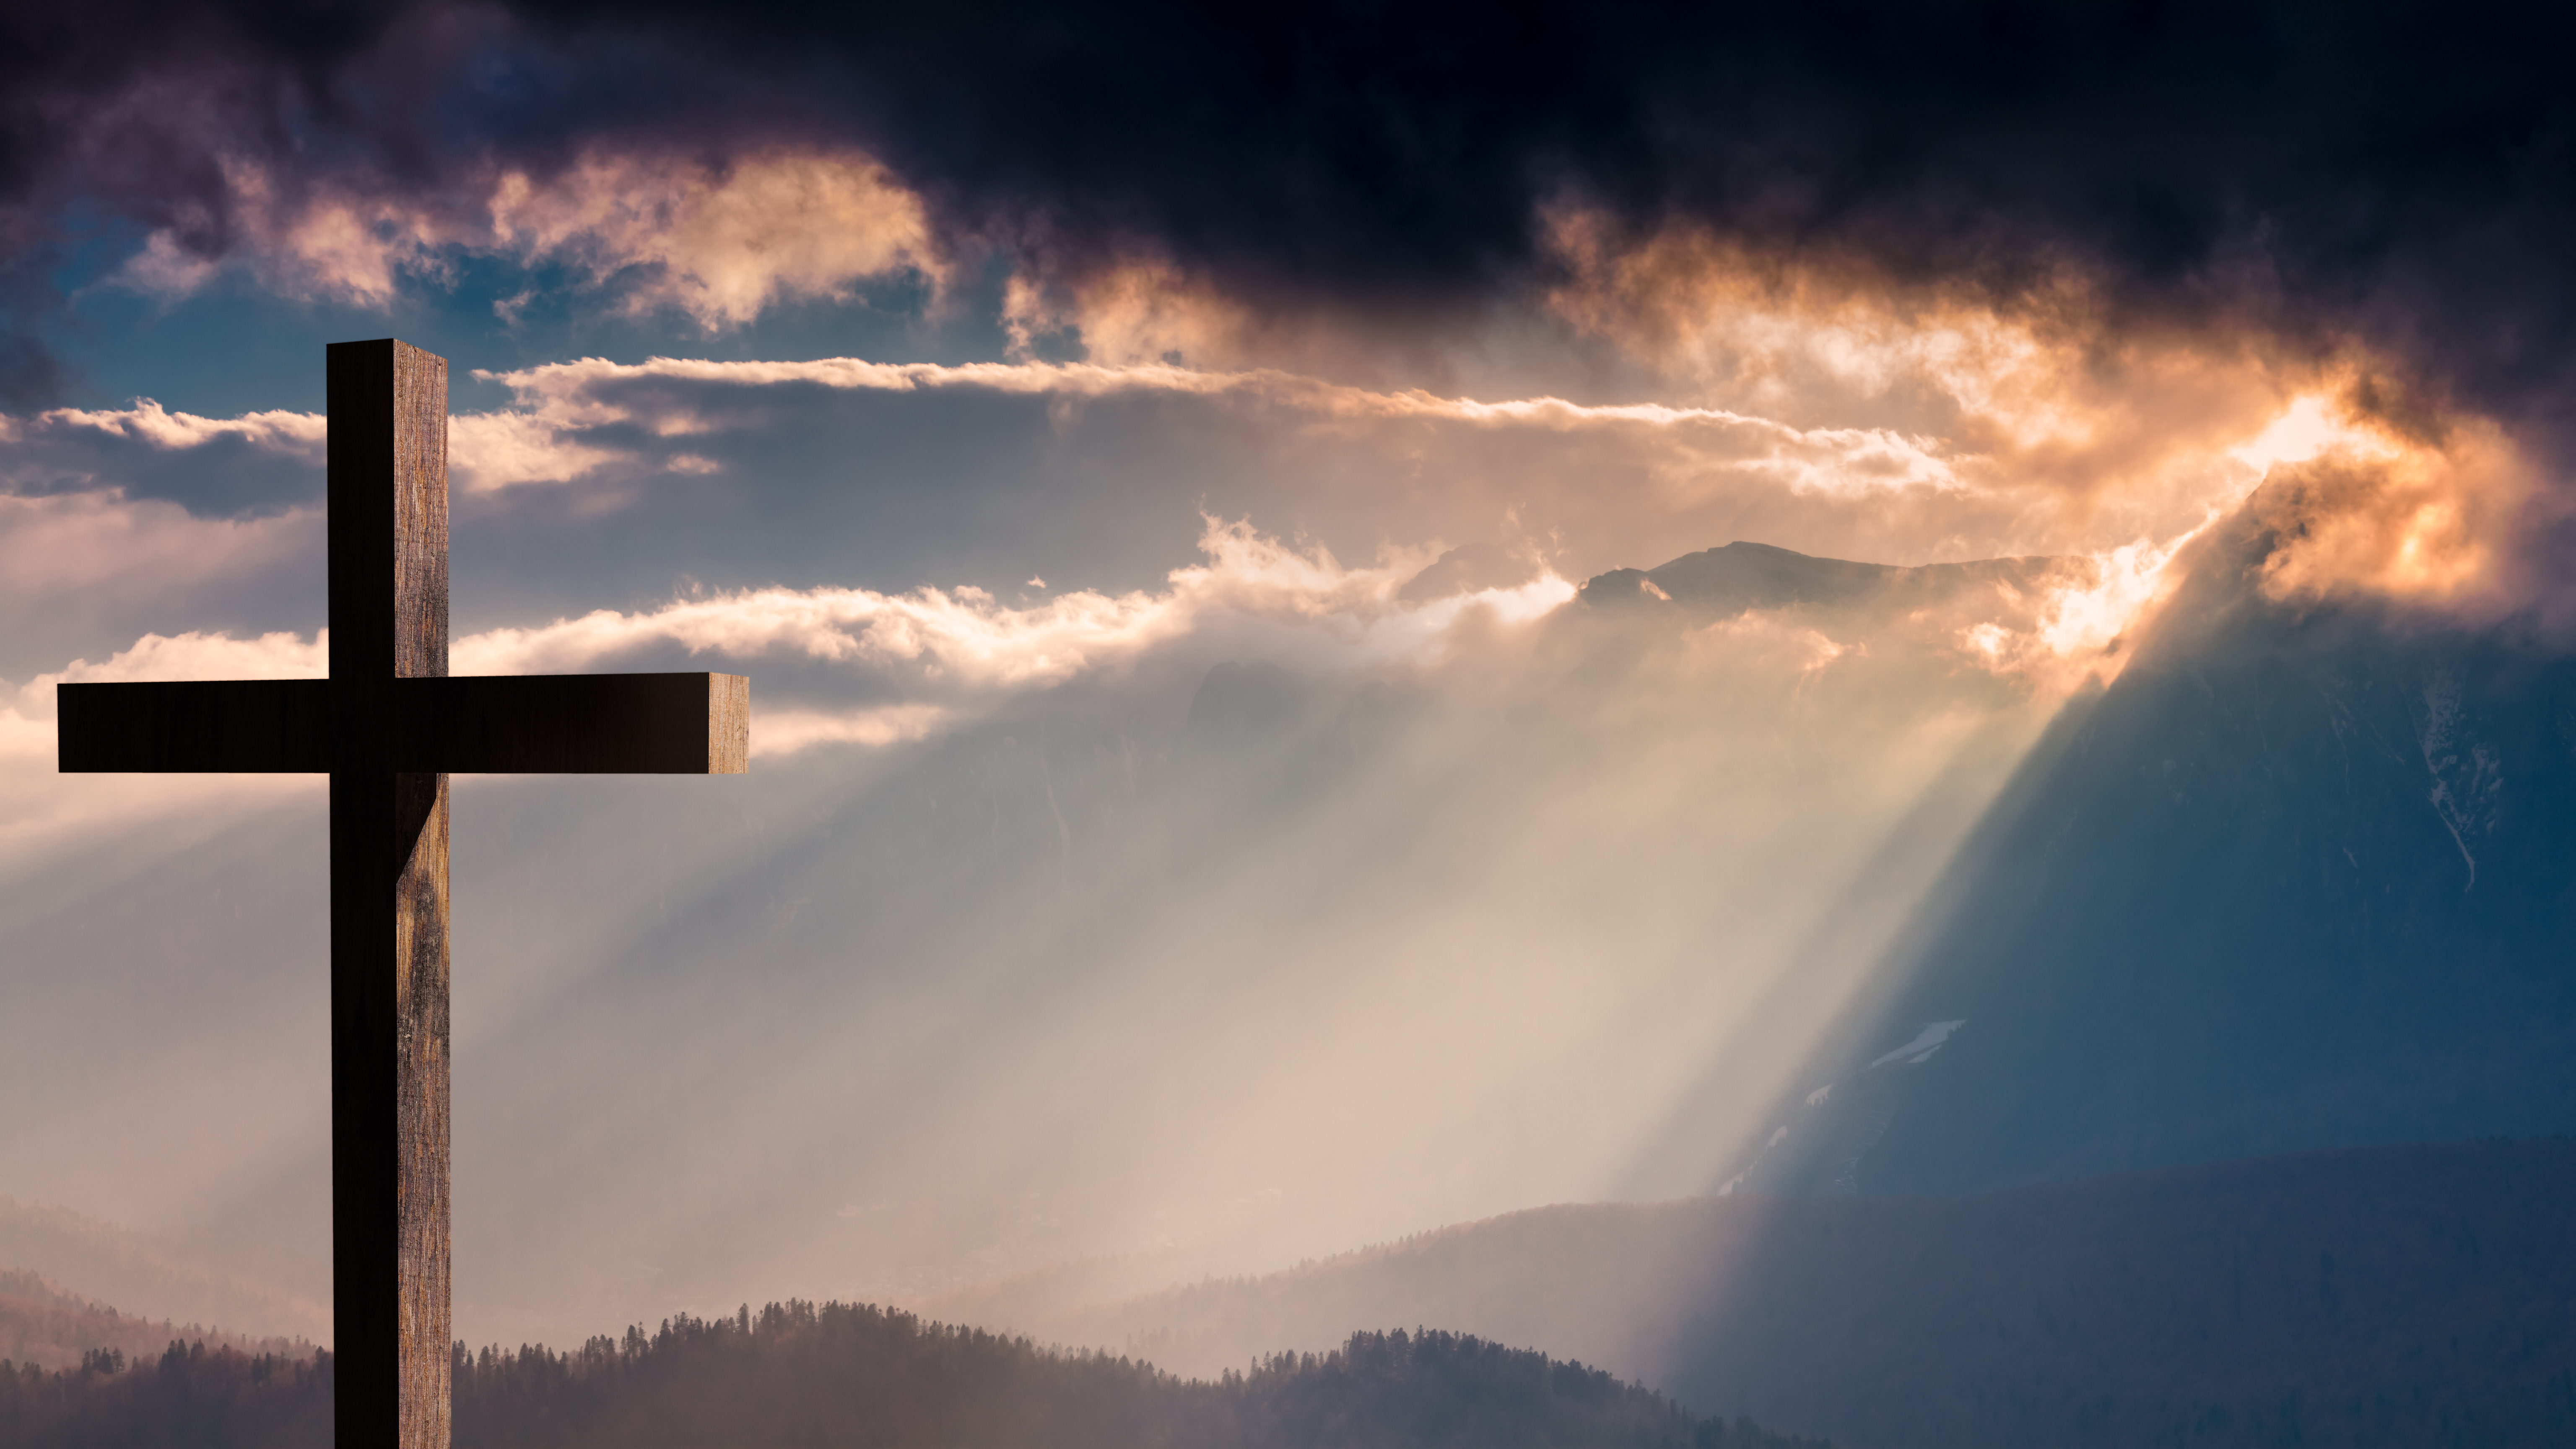 Jesus Christ cross. Easter, resurrection concept. Christian cross on a background with dramatic lighting, colorful mountain sunset, dark clouds and sky and sunbeams